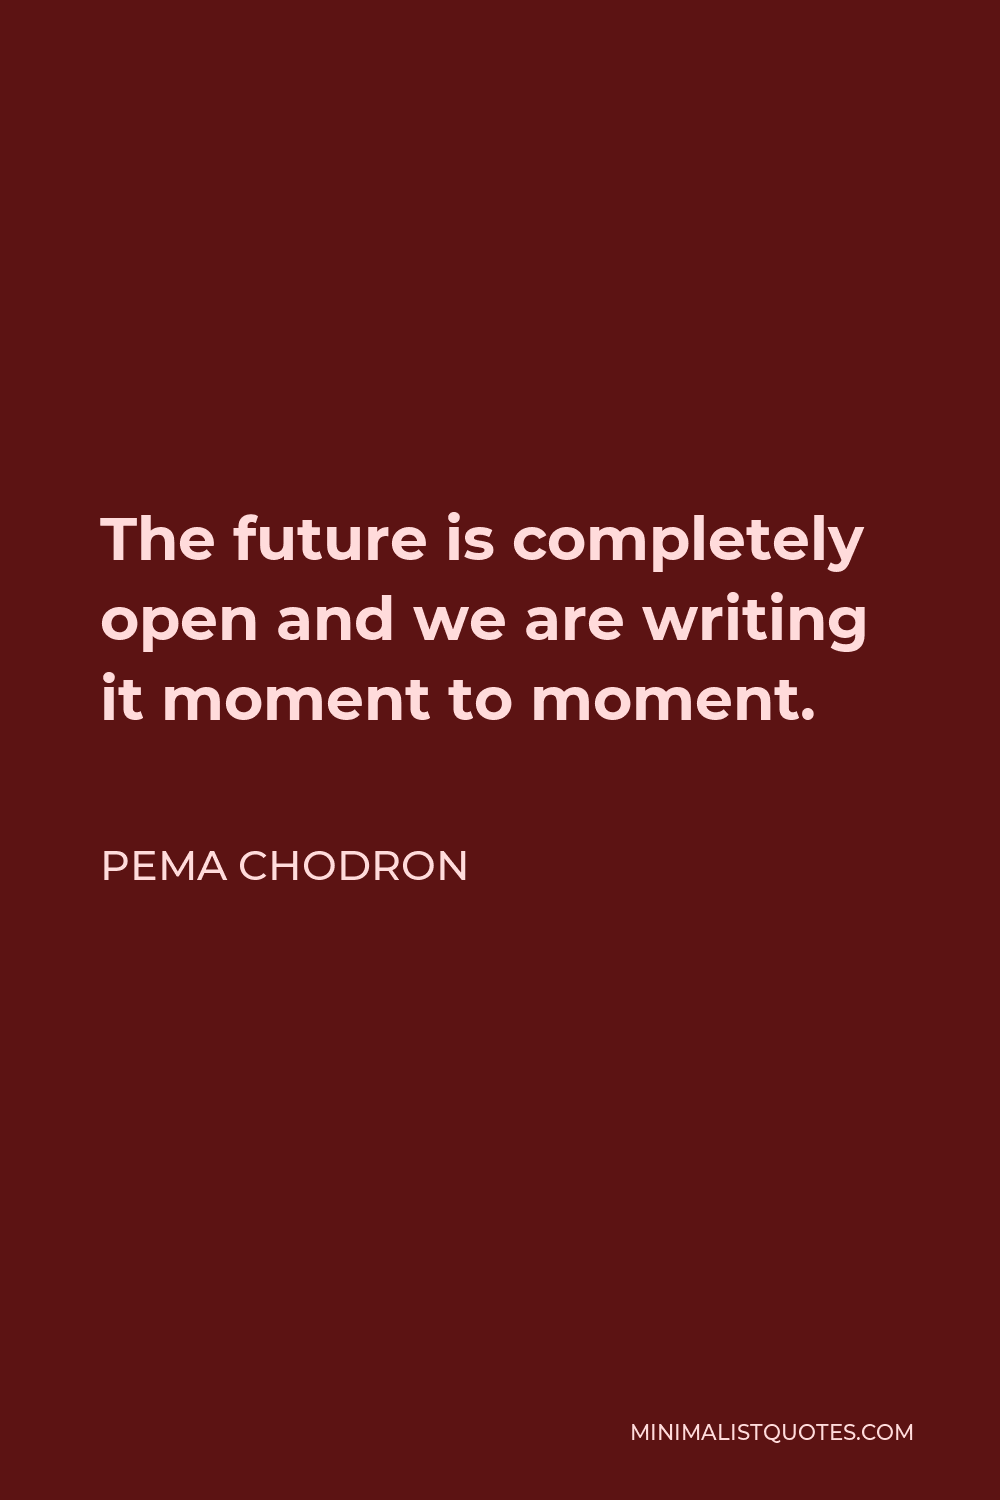 Pema Chodron Quote - The future is completely open and we are writing it moment to moment.